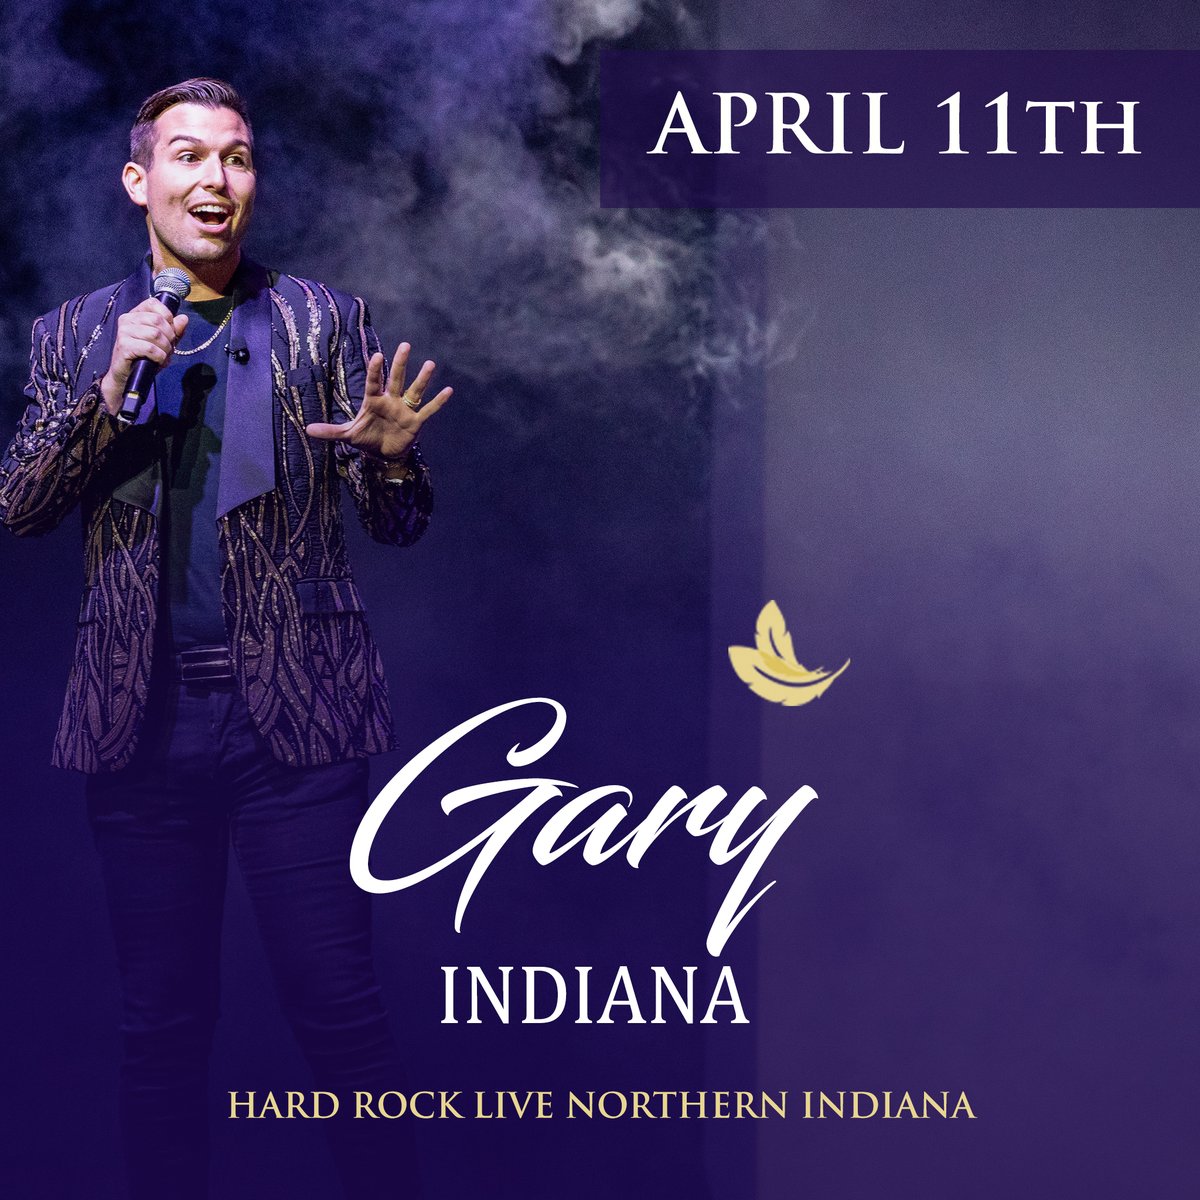 🌟 Indiana, gear up for a night to remember. Join Matt Fraser at Hard Rock LIVE on April 11th for a night of psychic readings. Tickets are selling fast, secure yours at MeetMattFraser.com